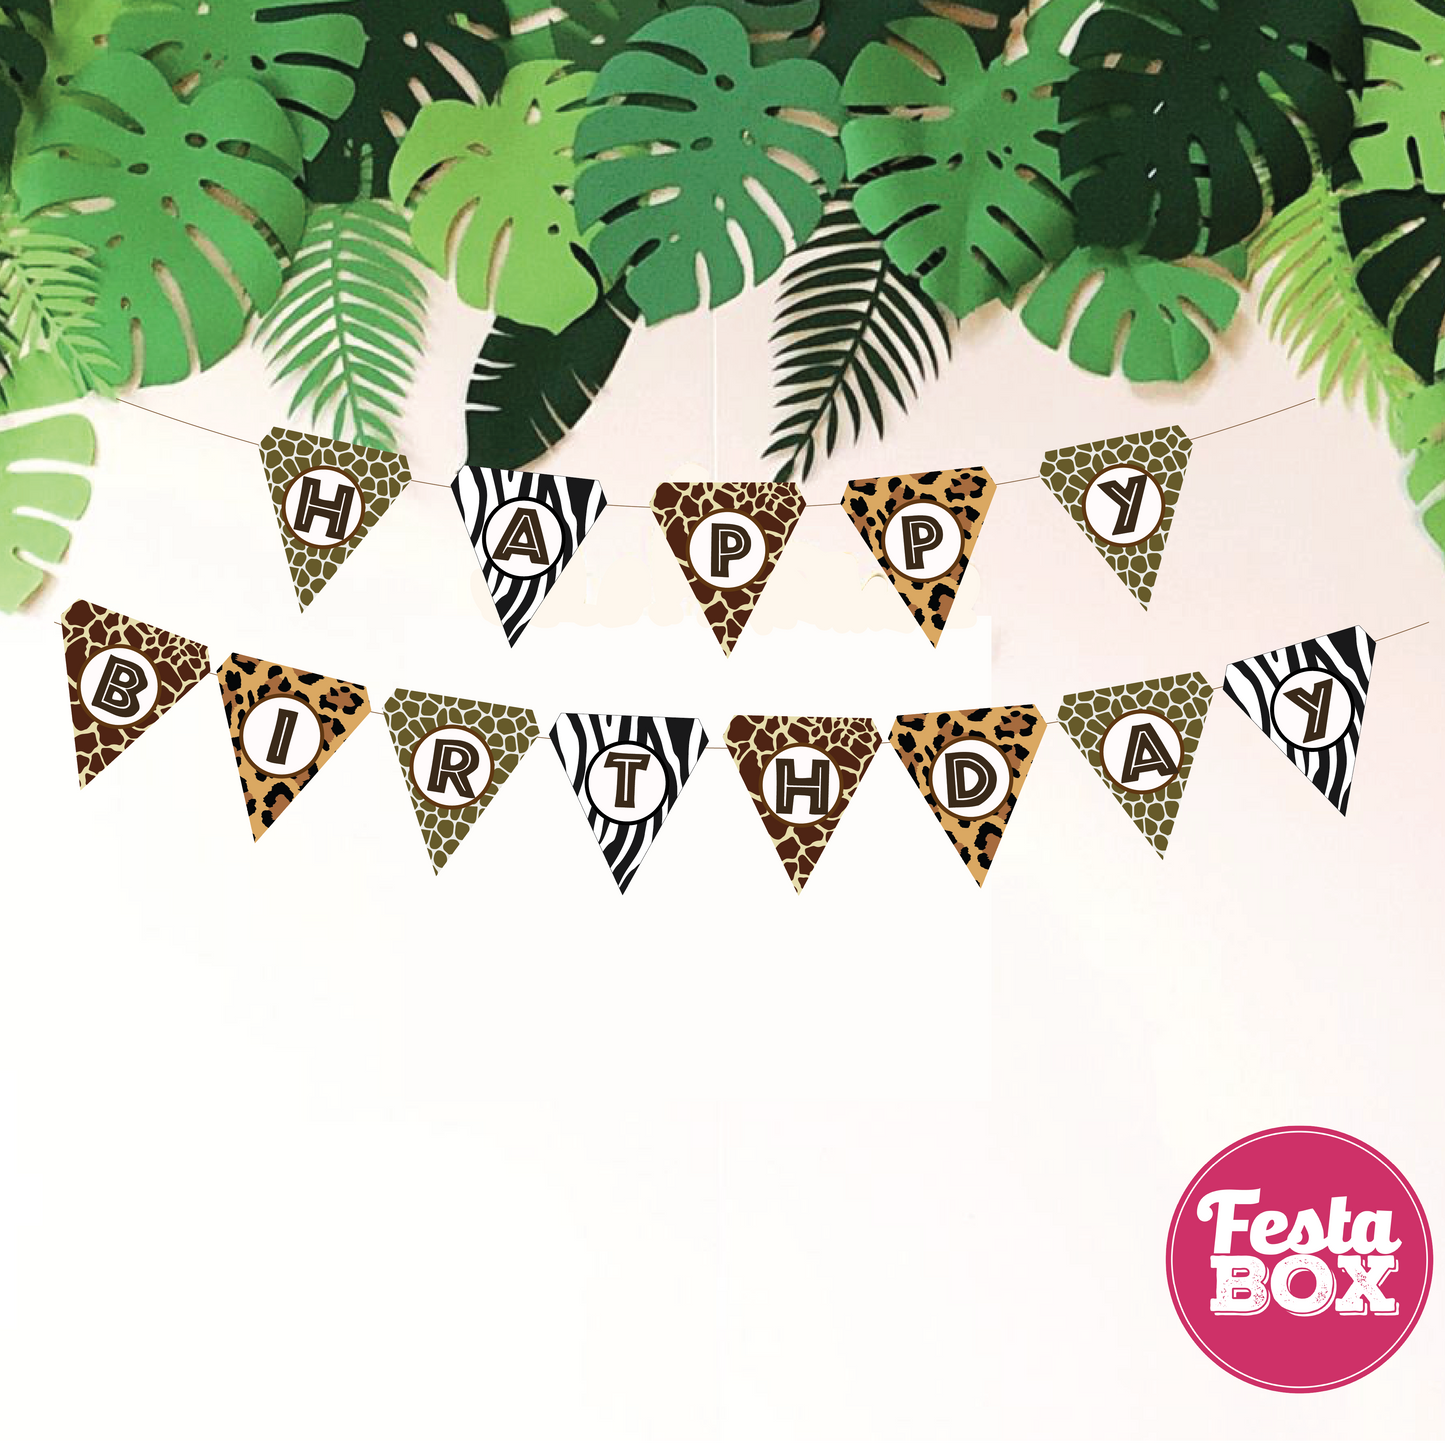 Background Banner for Birthday Party Decoration – Jungle Safari Theme